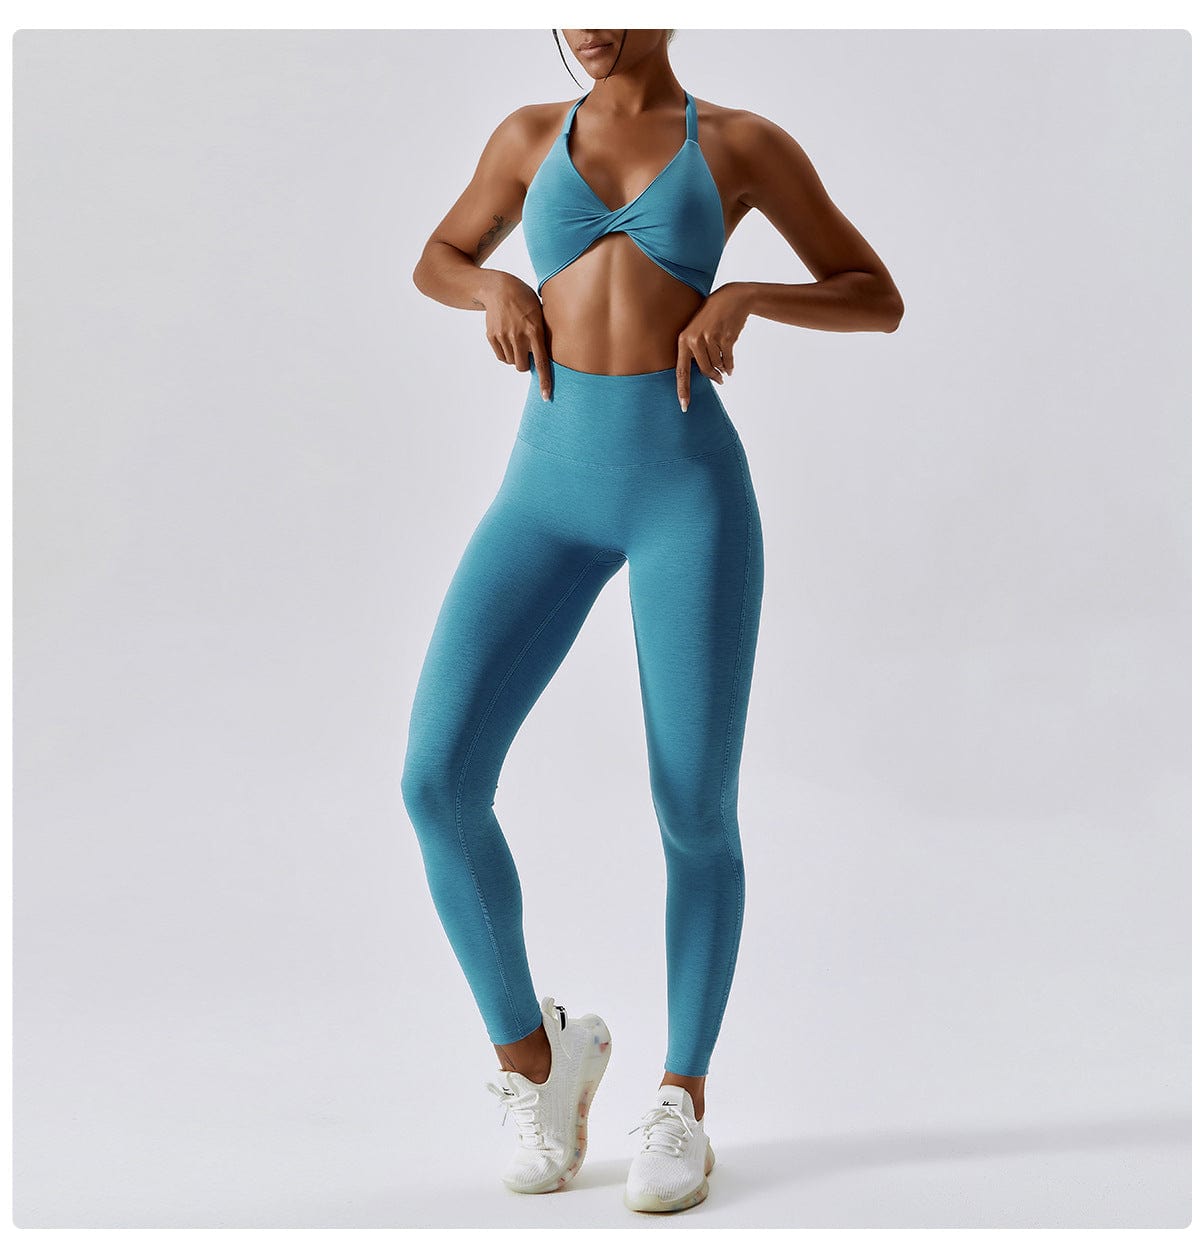 Scrunch Hip Up Leggings and Twisted Sports Bra Set